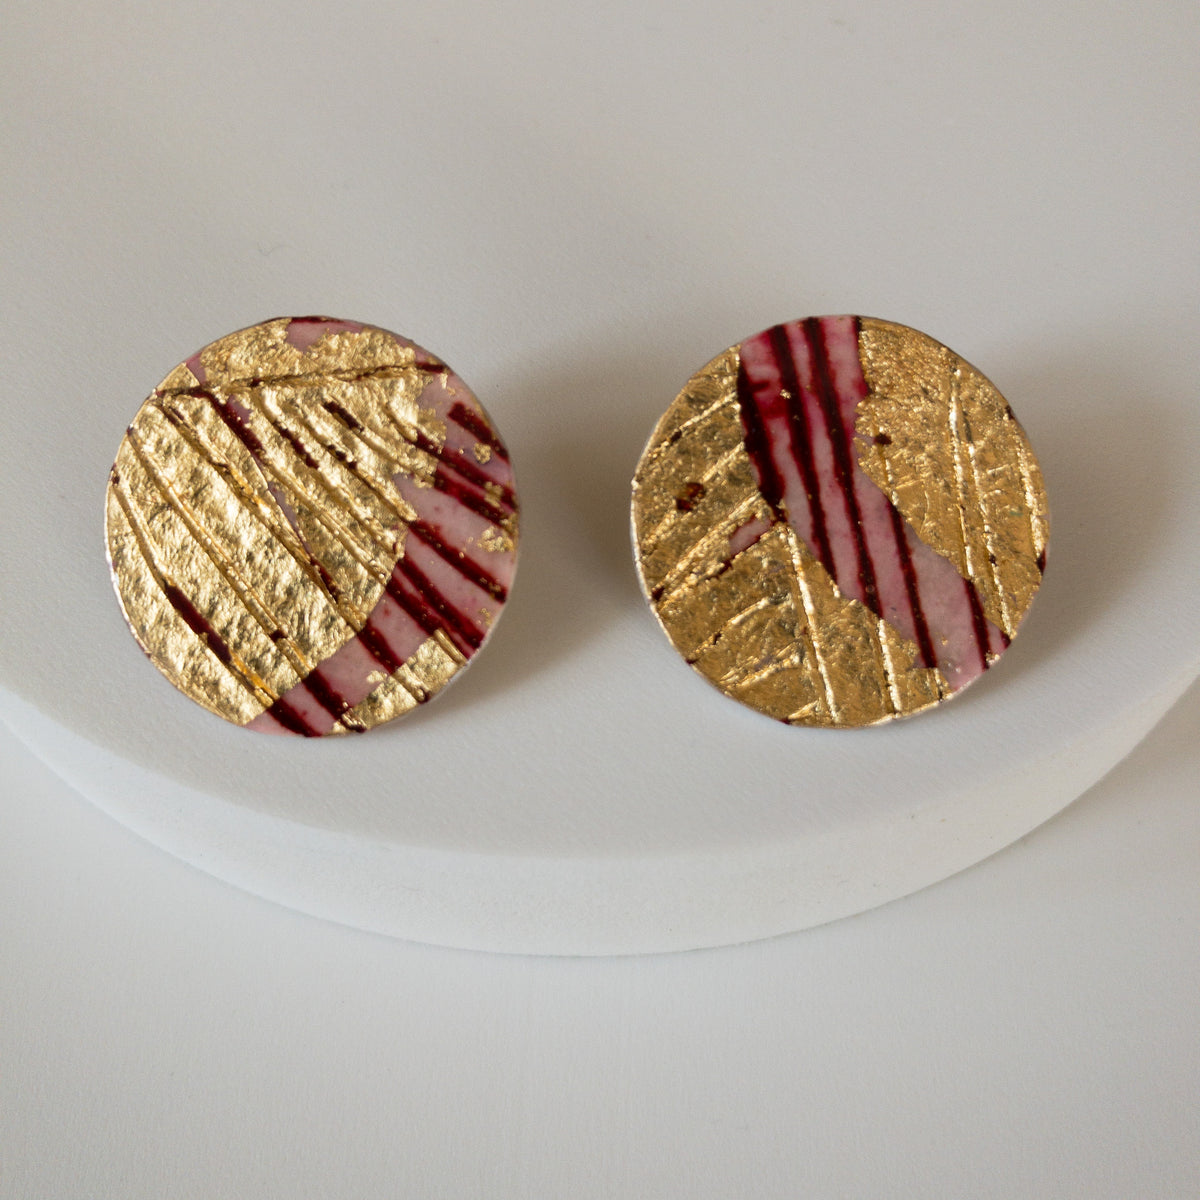 Ró sgraffito earrings in red/gold